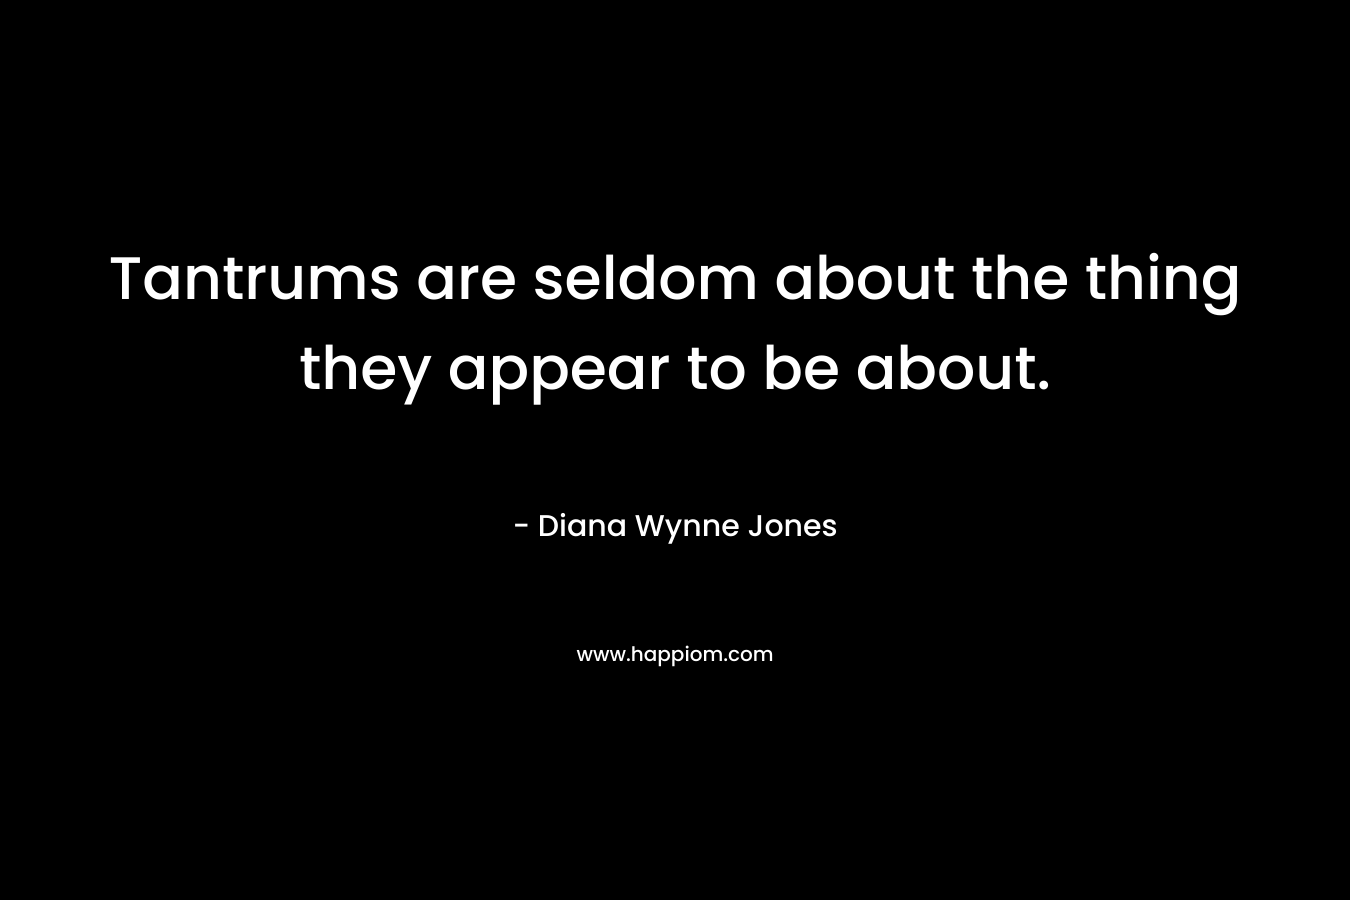 Tantrums are seldom about the thing they appear to be about. – Diana Wynne Jones